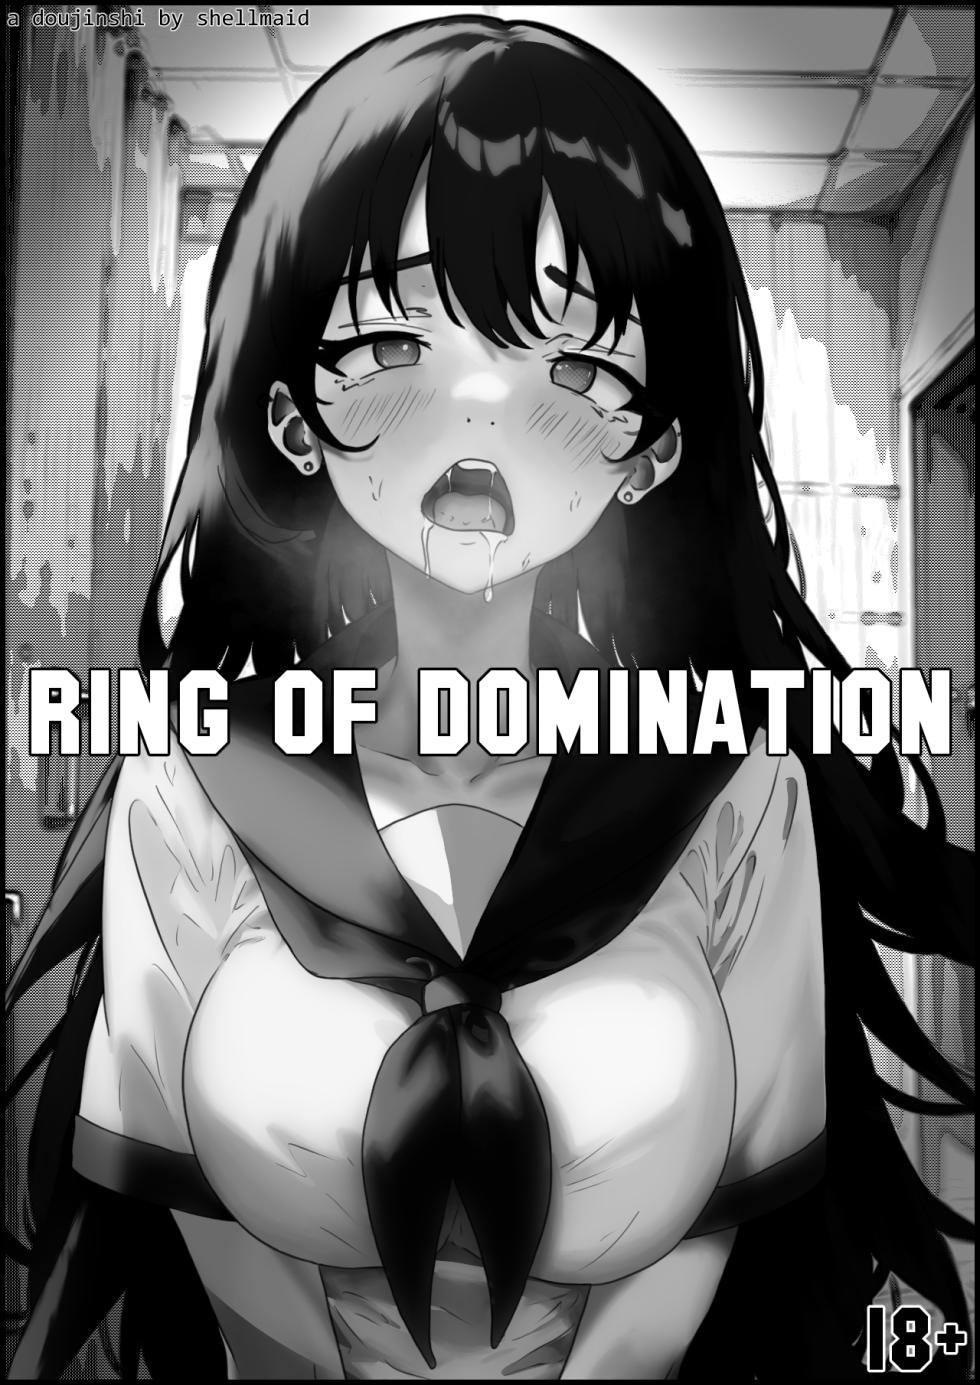 [shellmaid] Ring of Domination - Page 1